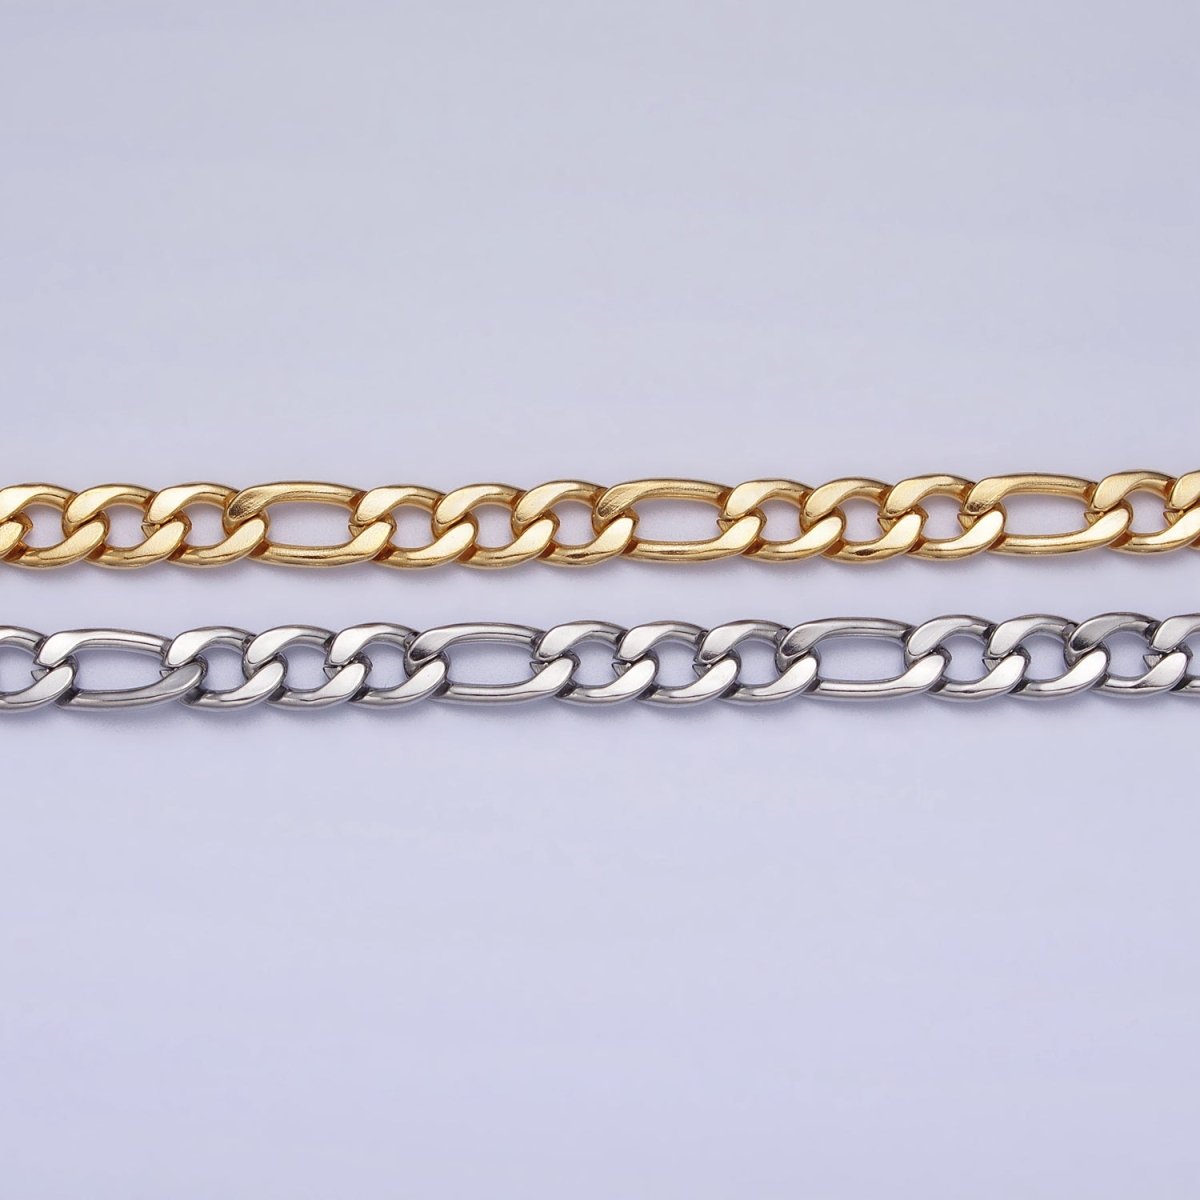 Long Gold Figaro Chain Necklace Stainless Steel 5.2mm Thick Men's Chain 23.5 inch Necklace | WA-1587 WA-1588 Clearance Pricing - DLUXCA